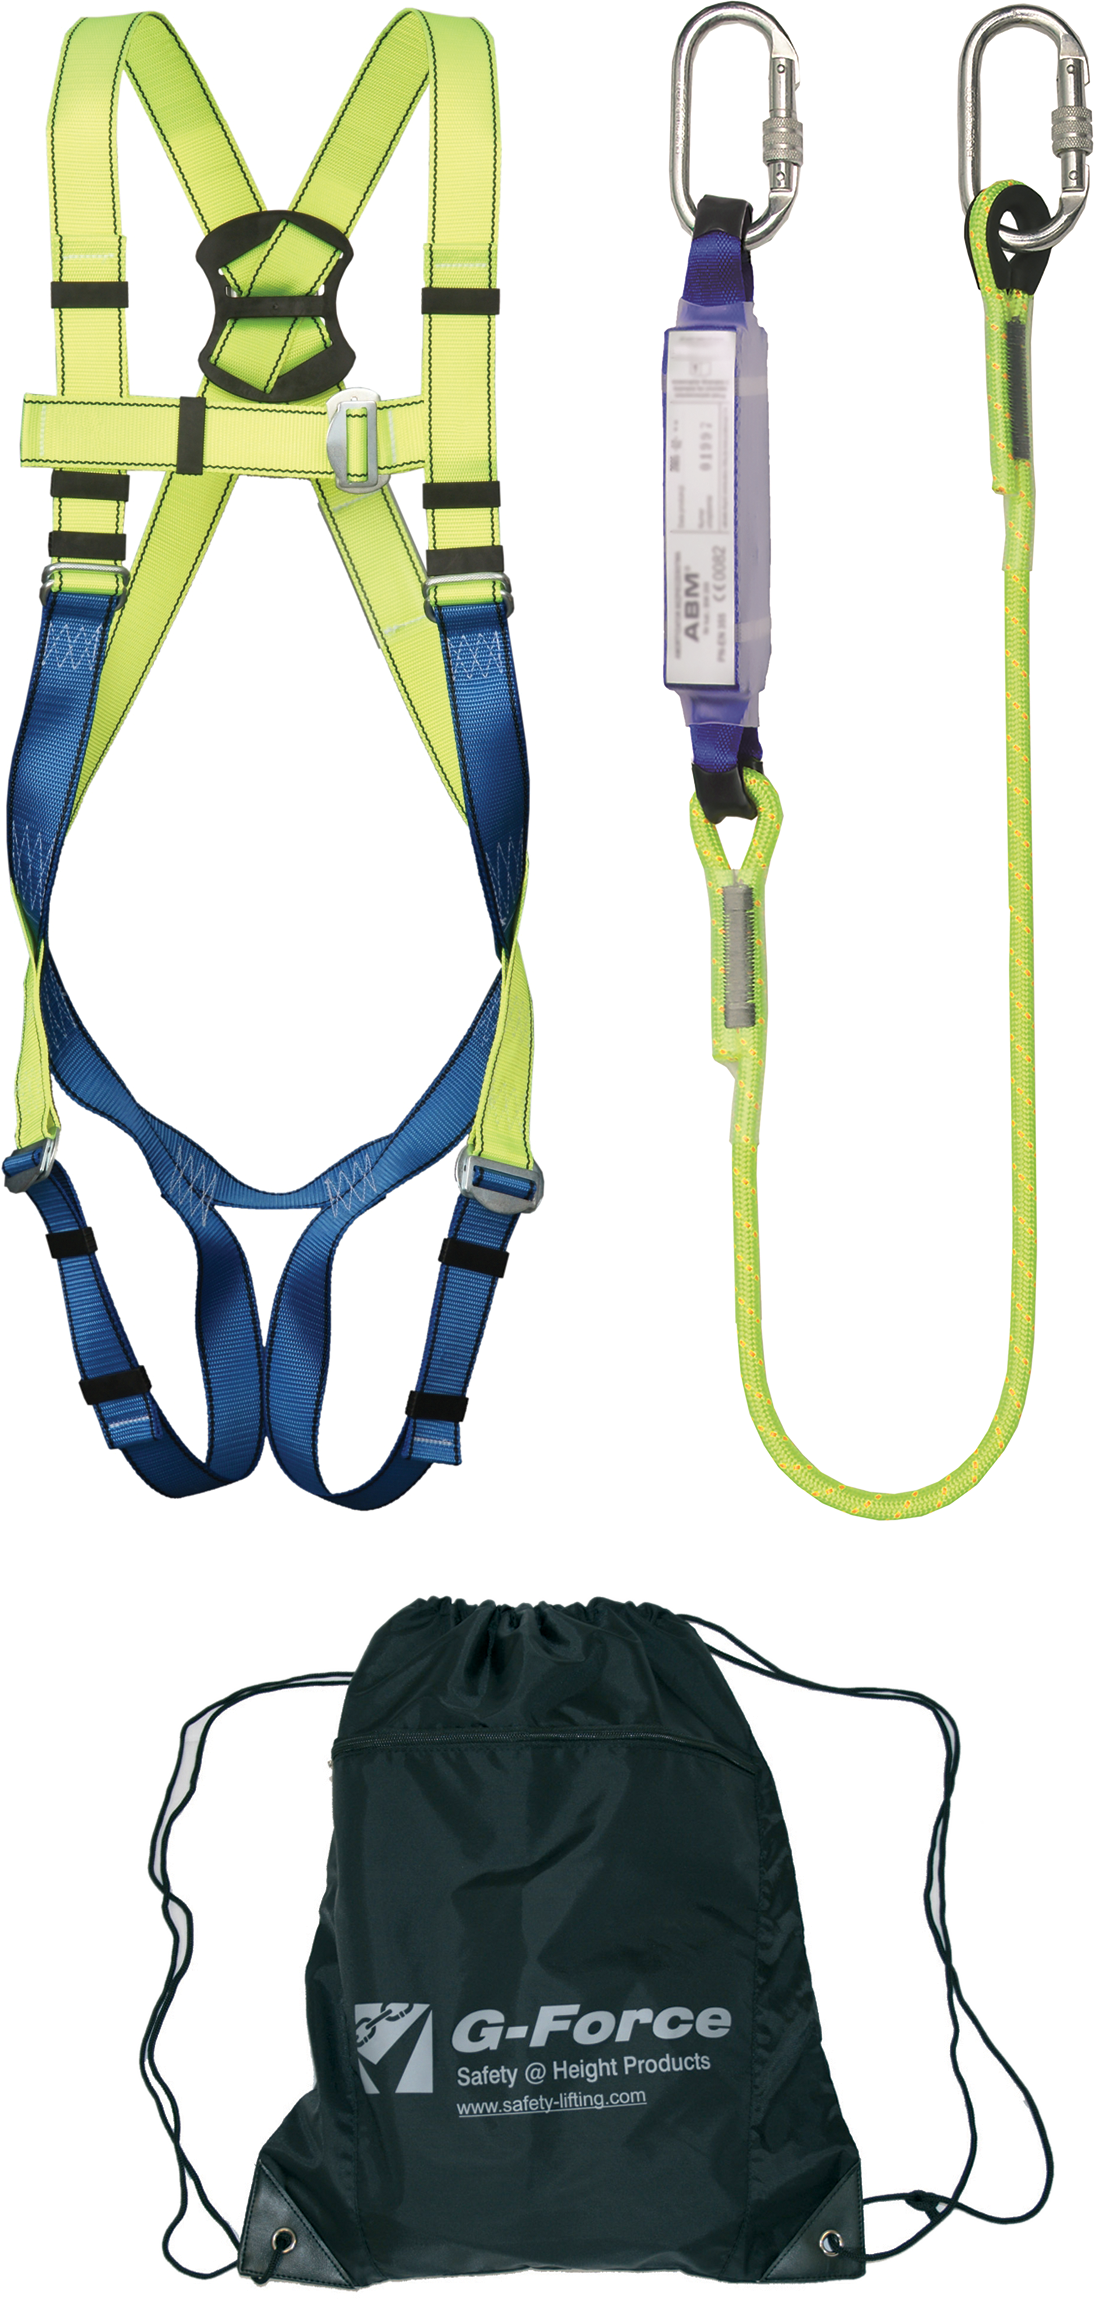 Harness & Shock Absorber Lanyard Kit| Safety Harnesses | CMW